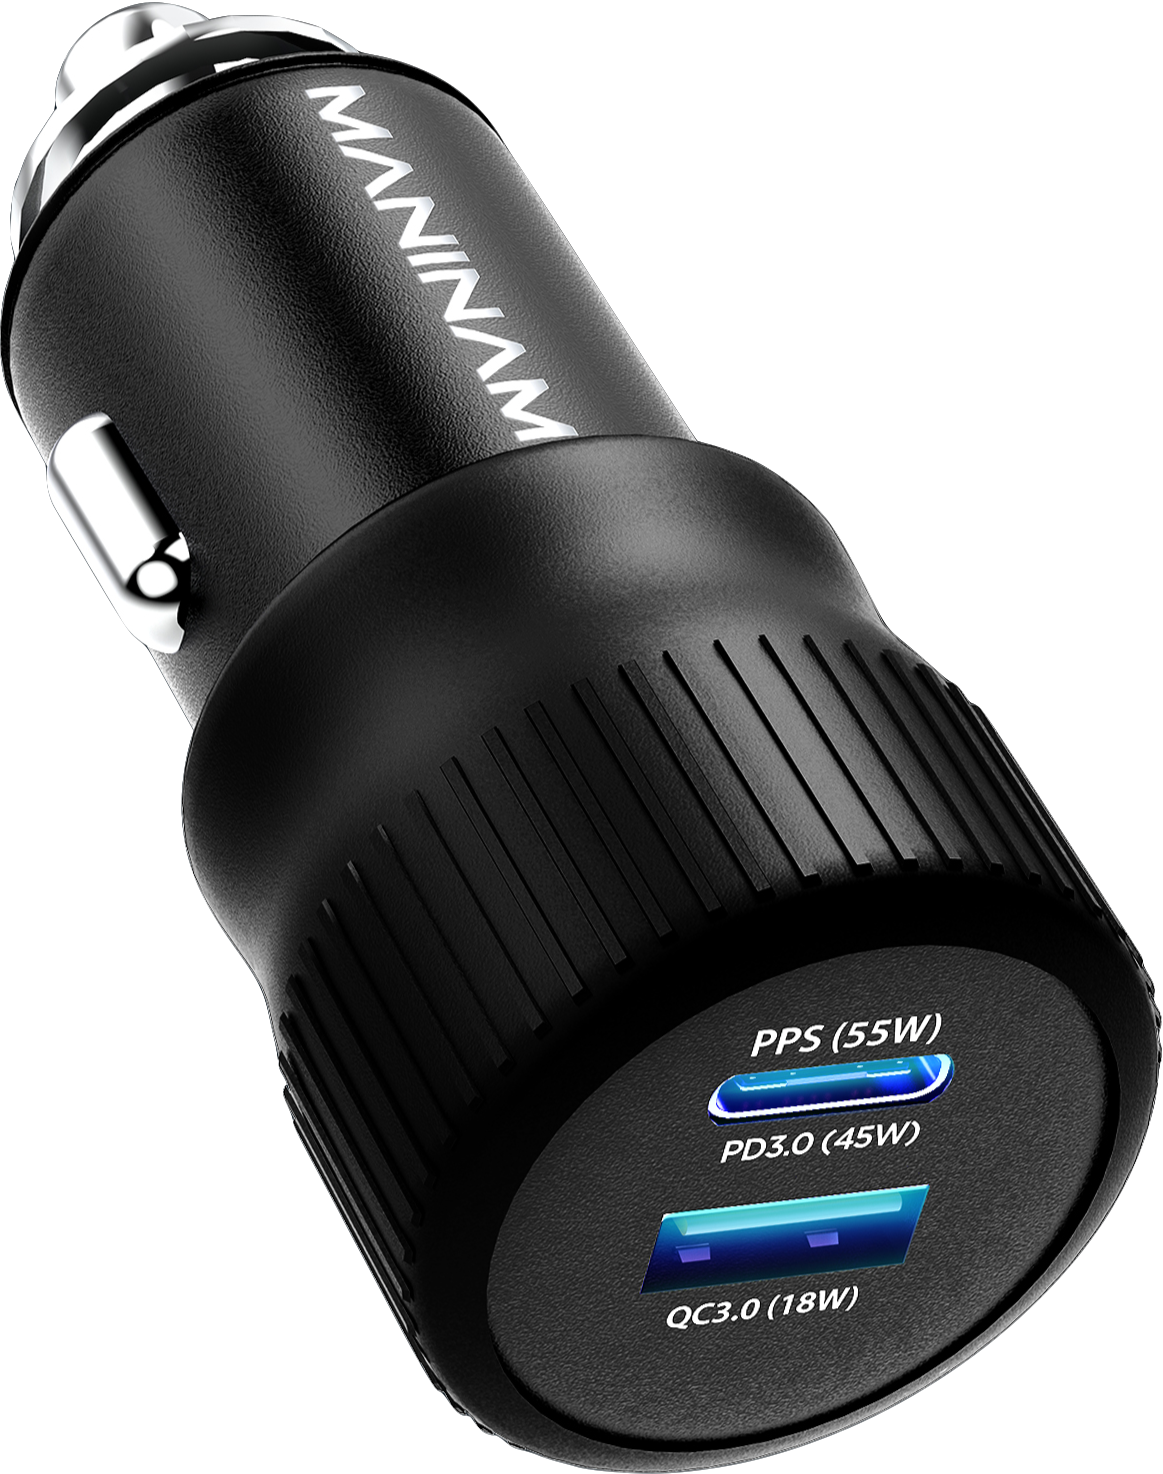 The Fastest USB C Car Charger: Turbotive™Technology-Equipped M113 MANINAM